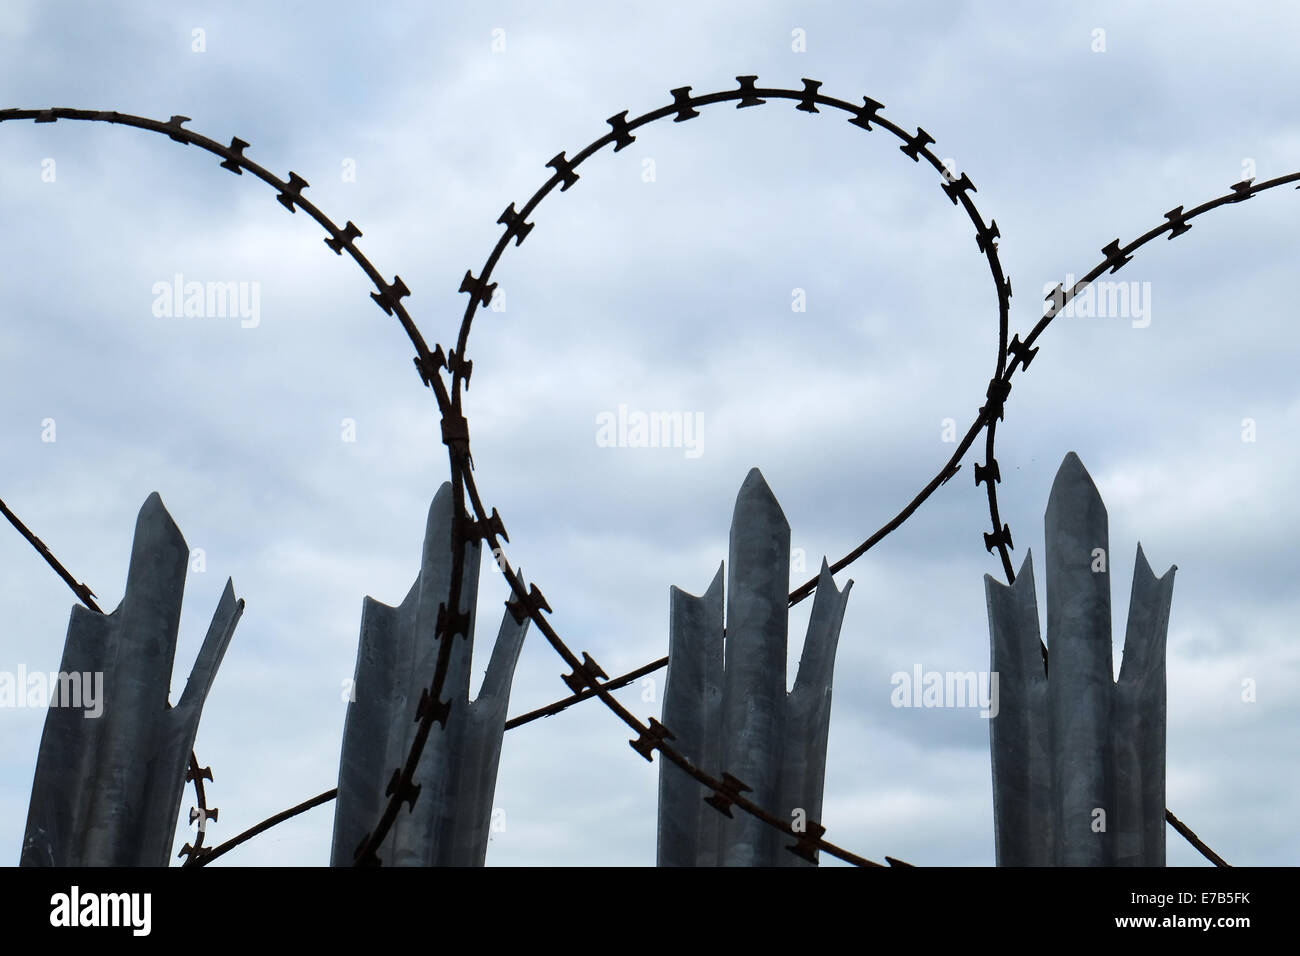 Razor wire and spiked steel posts. Stock Photo